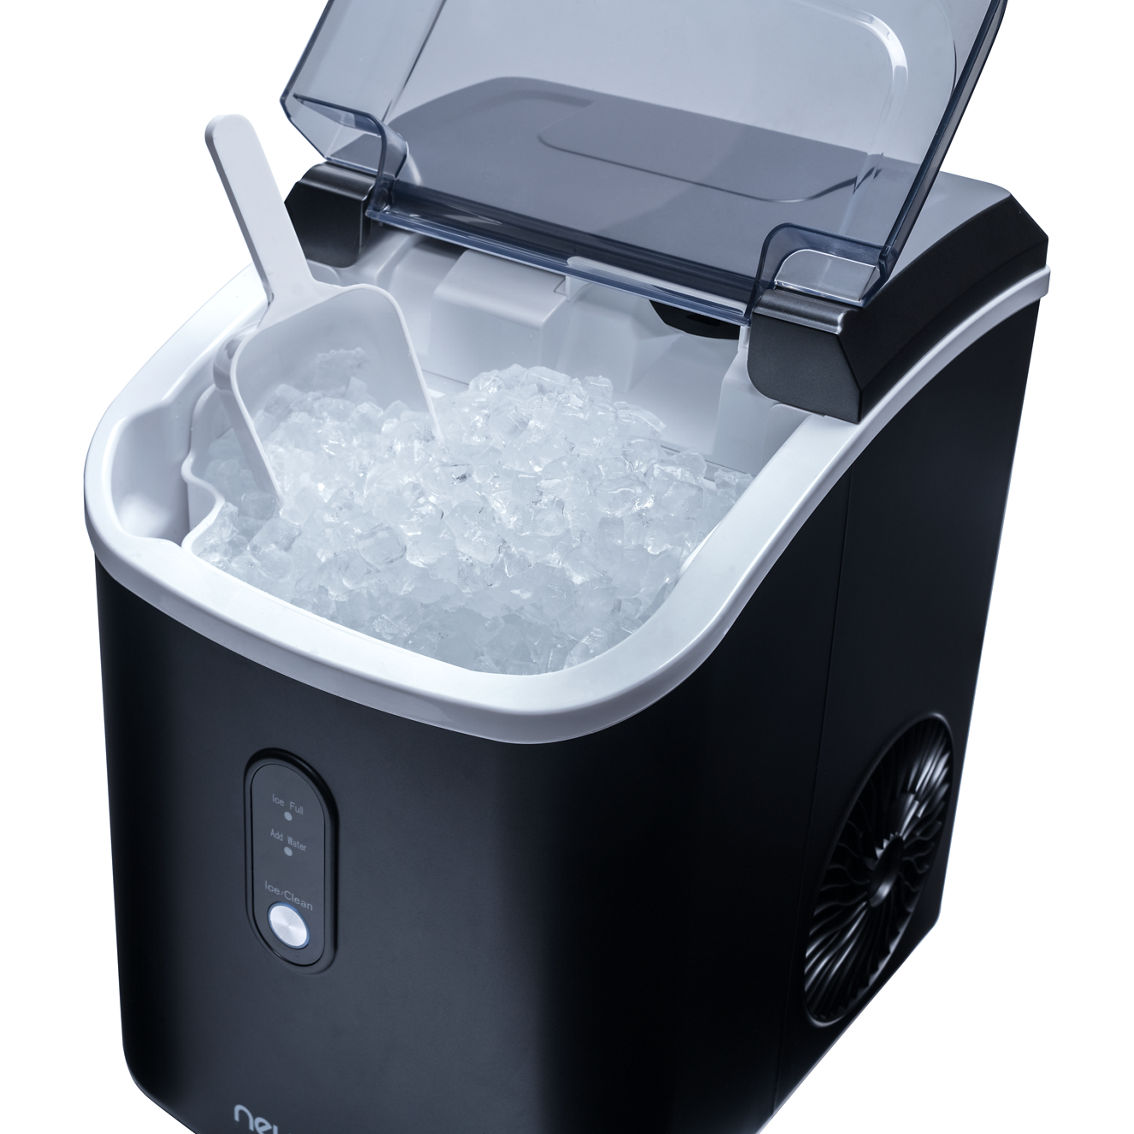 Newair 45lb. Nugget Countertop Ice Maker with Self-Cleaning Function,  Refillable Water Tank